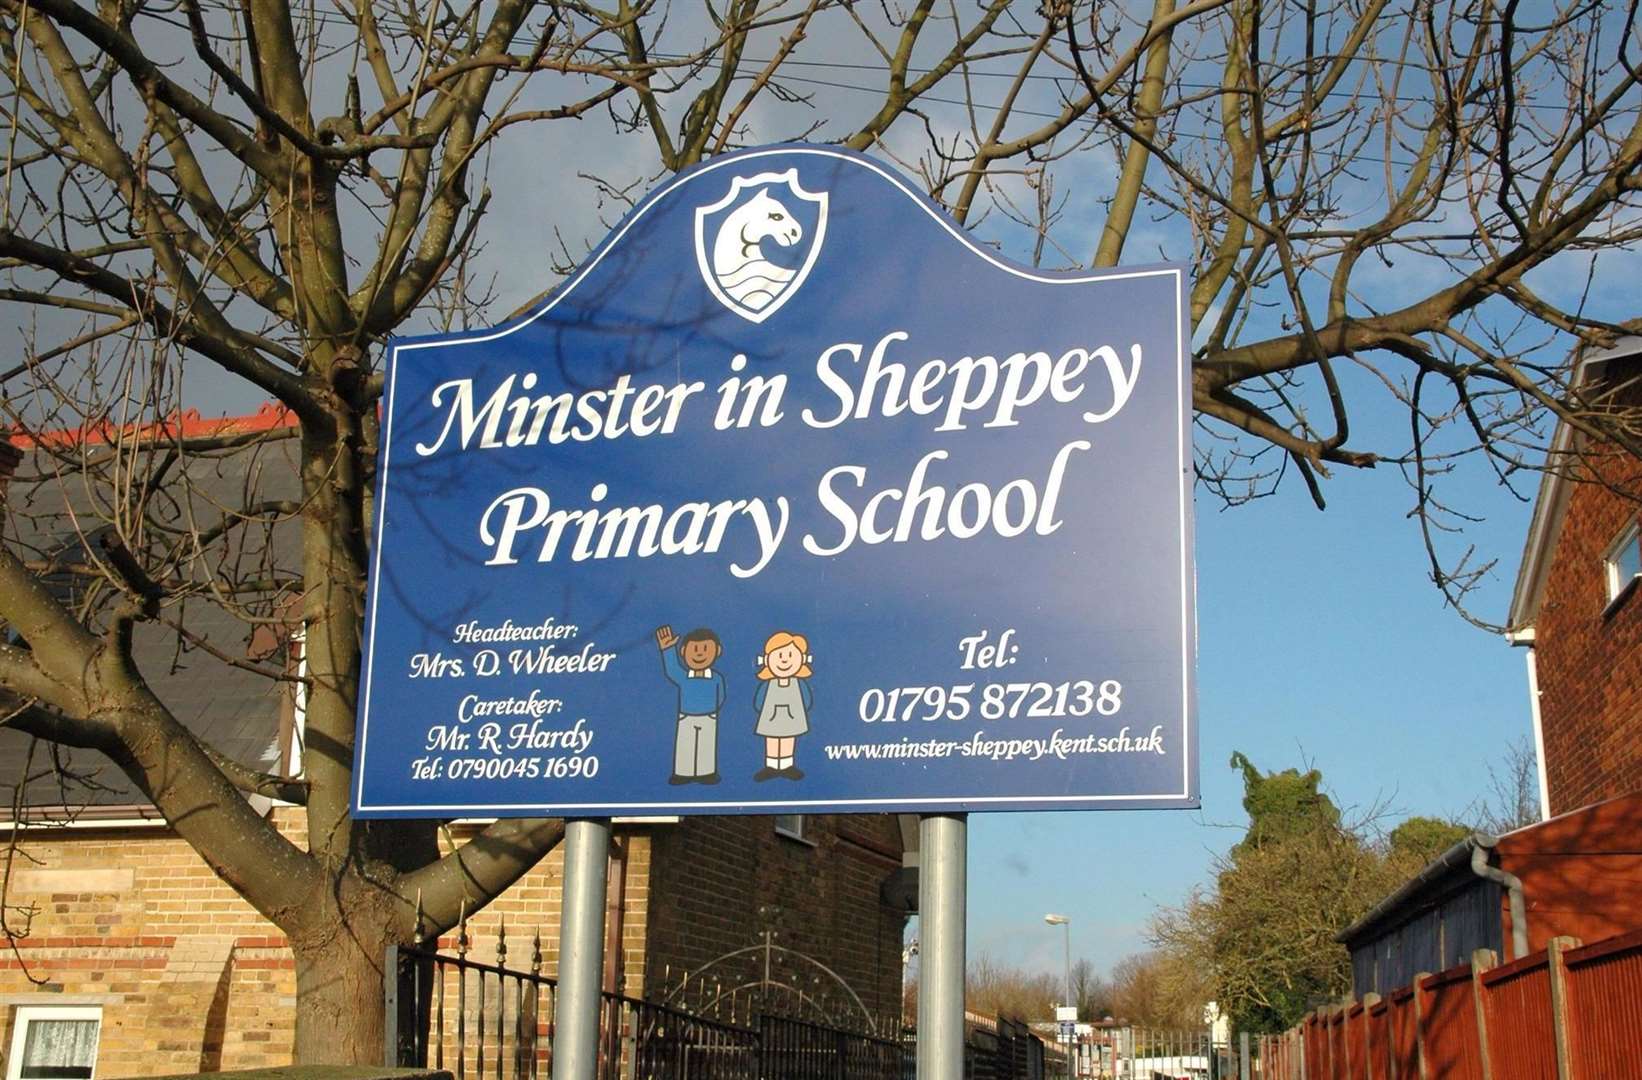 Minster Primary School on the Isle of Sheppey